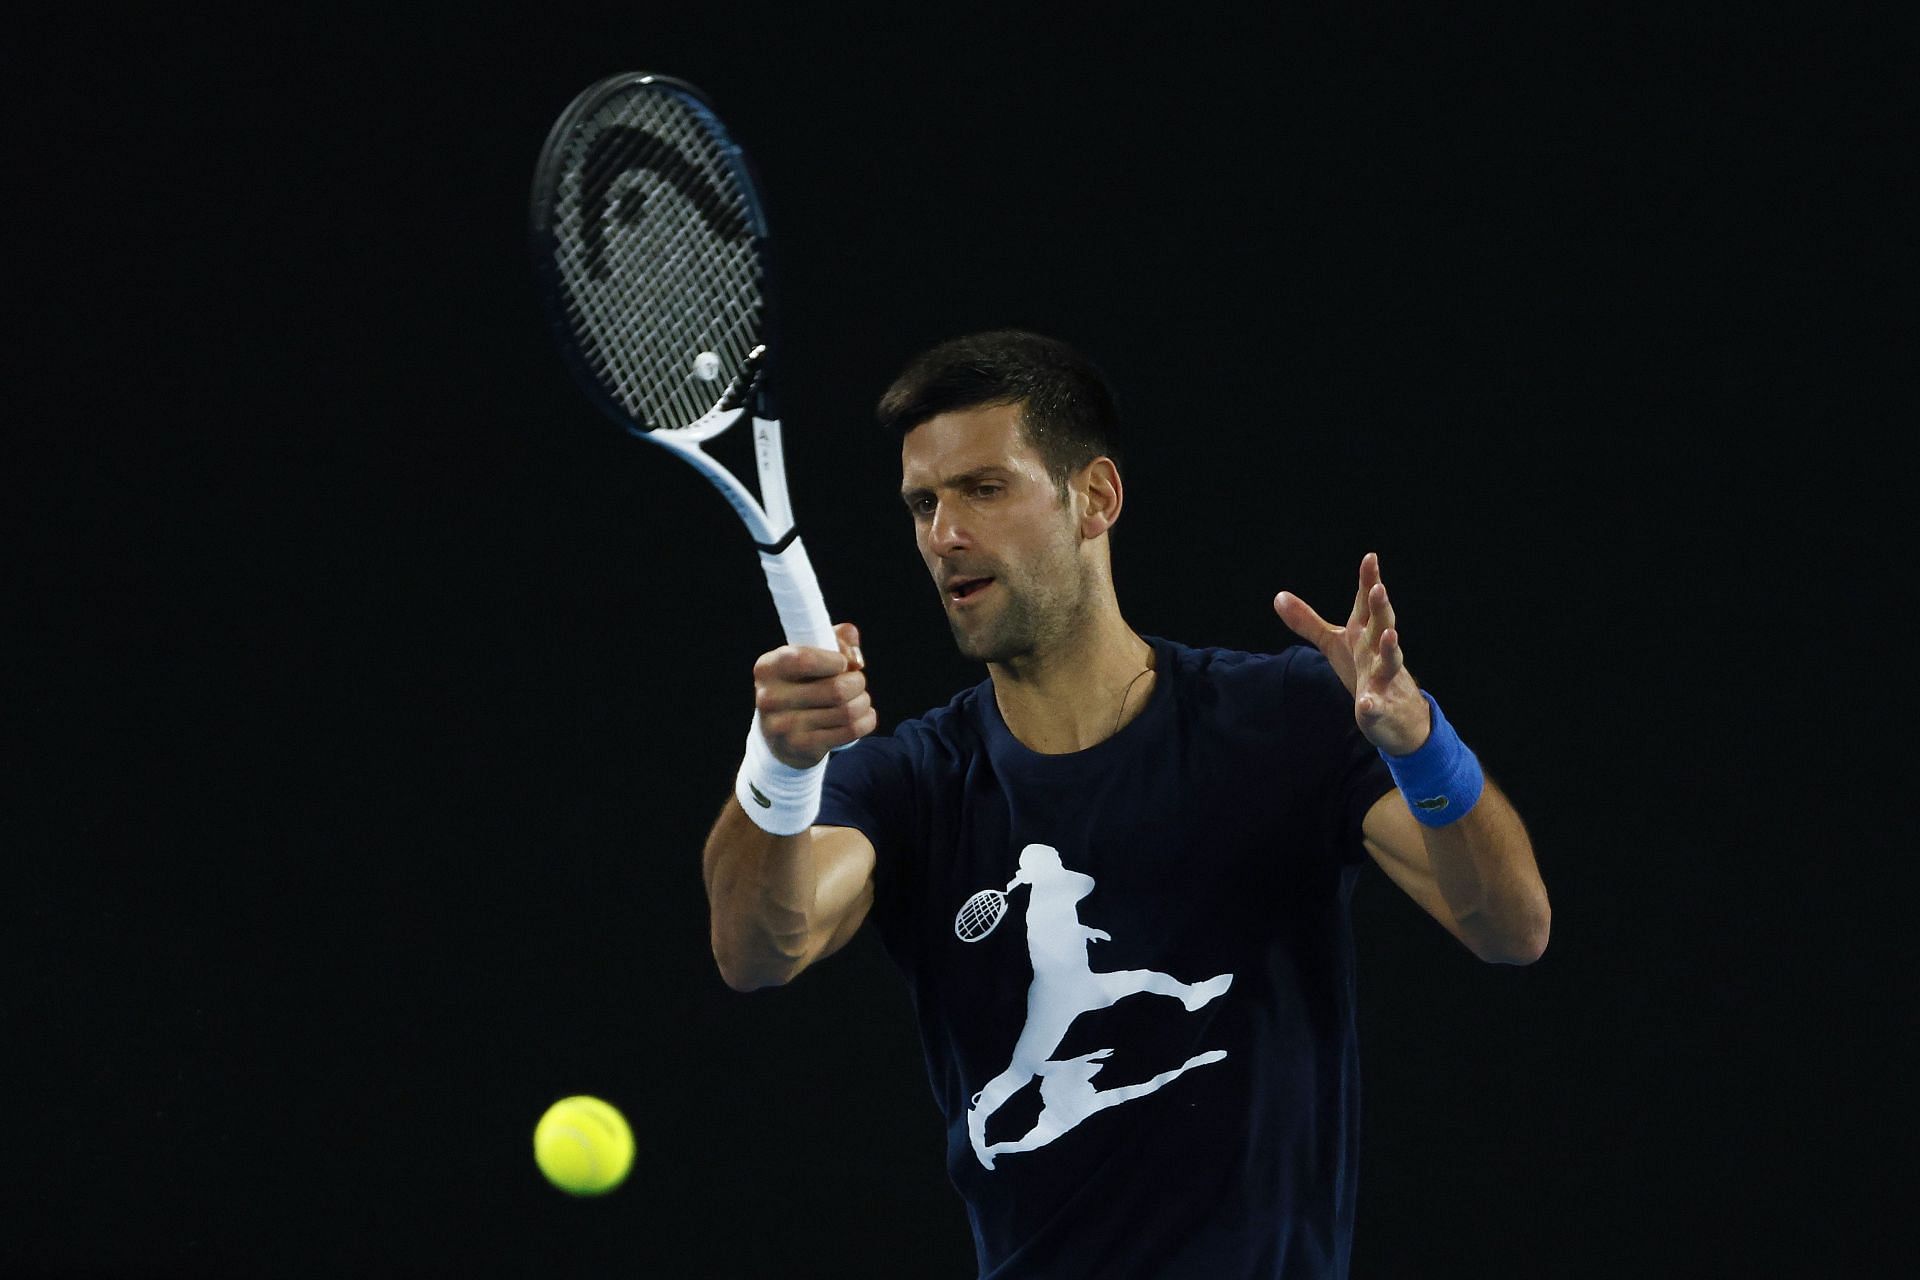 Novak Djokovic during one of his practice sessions in Melbourne